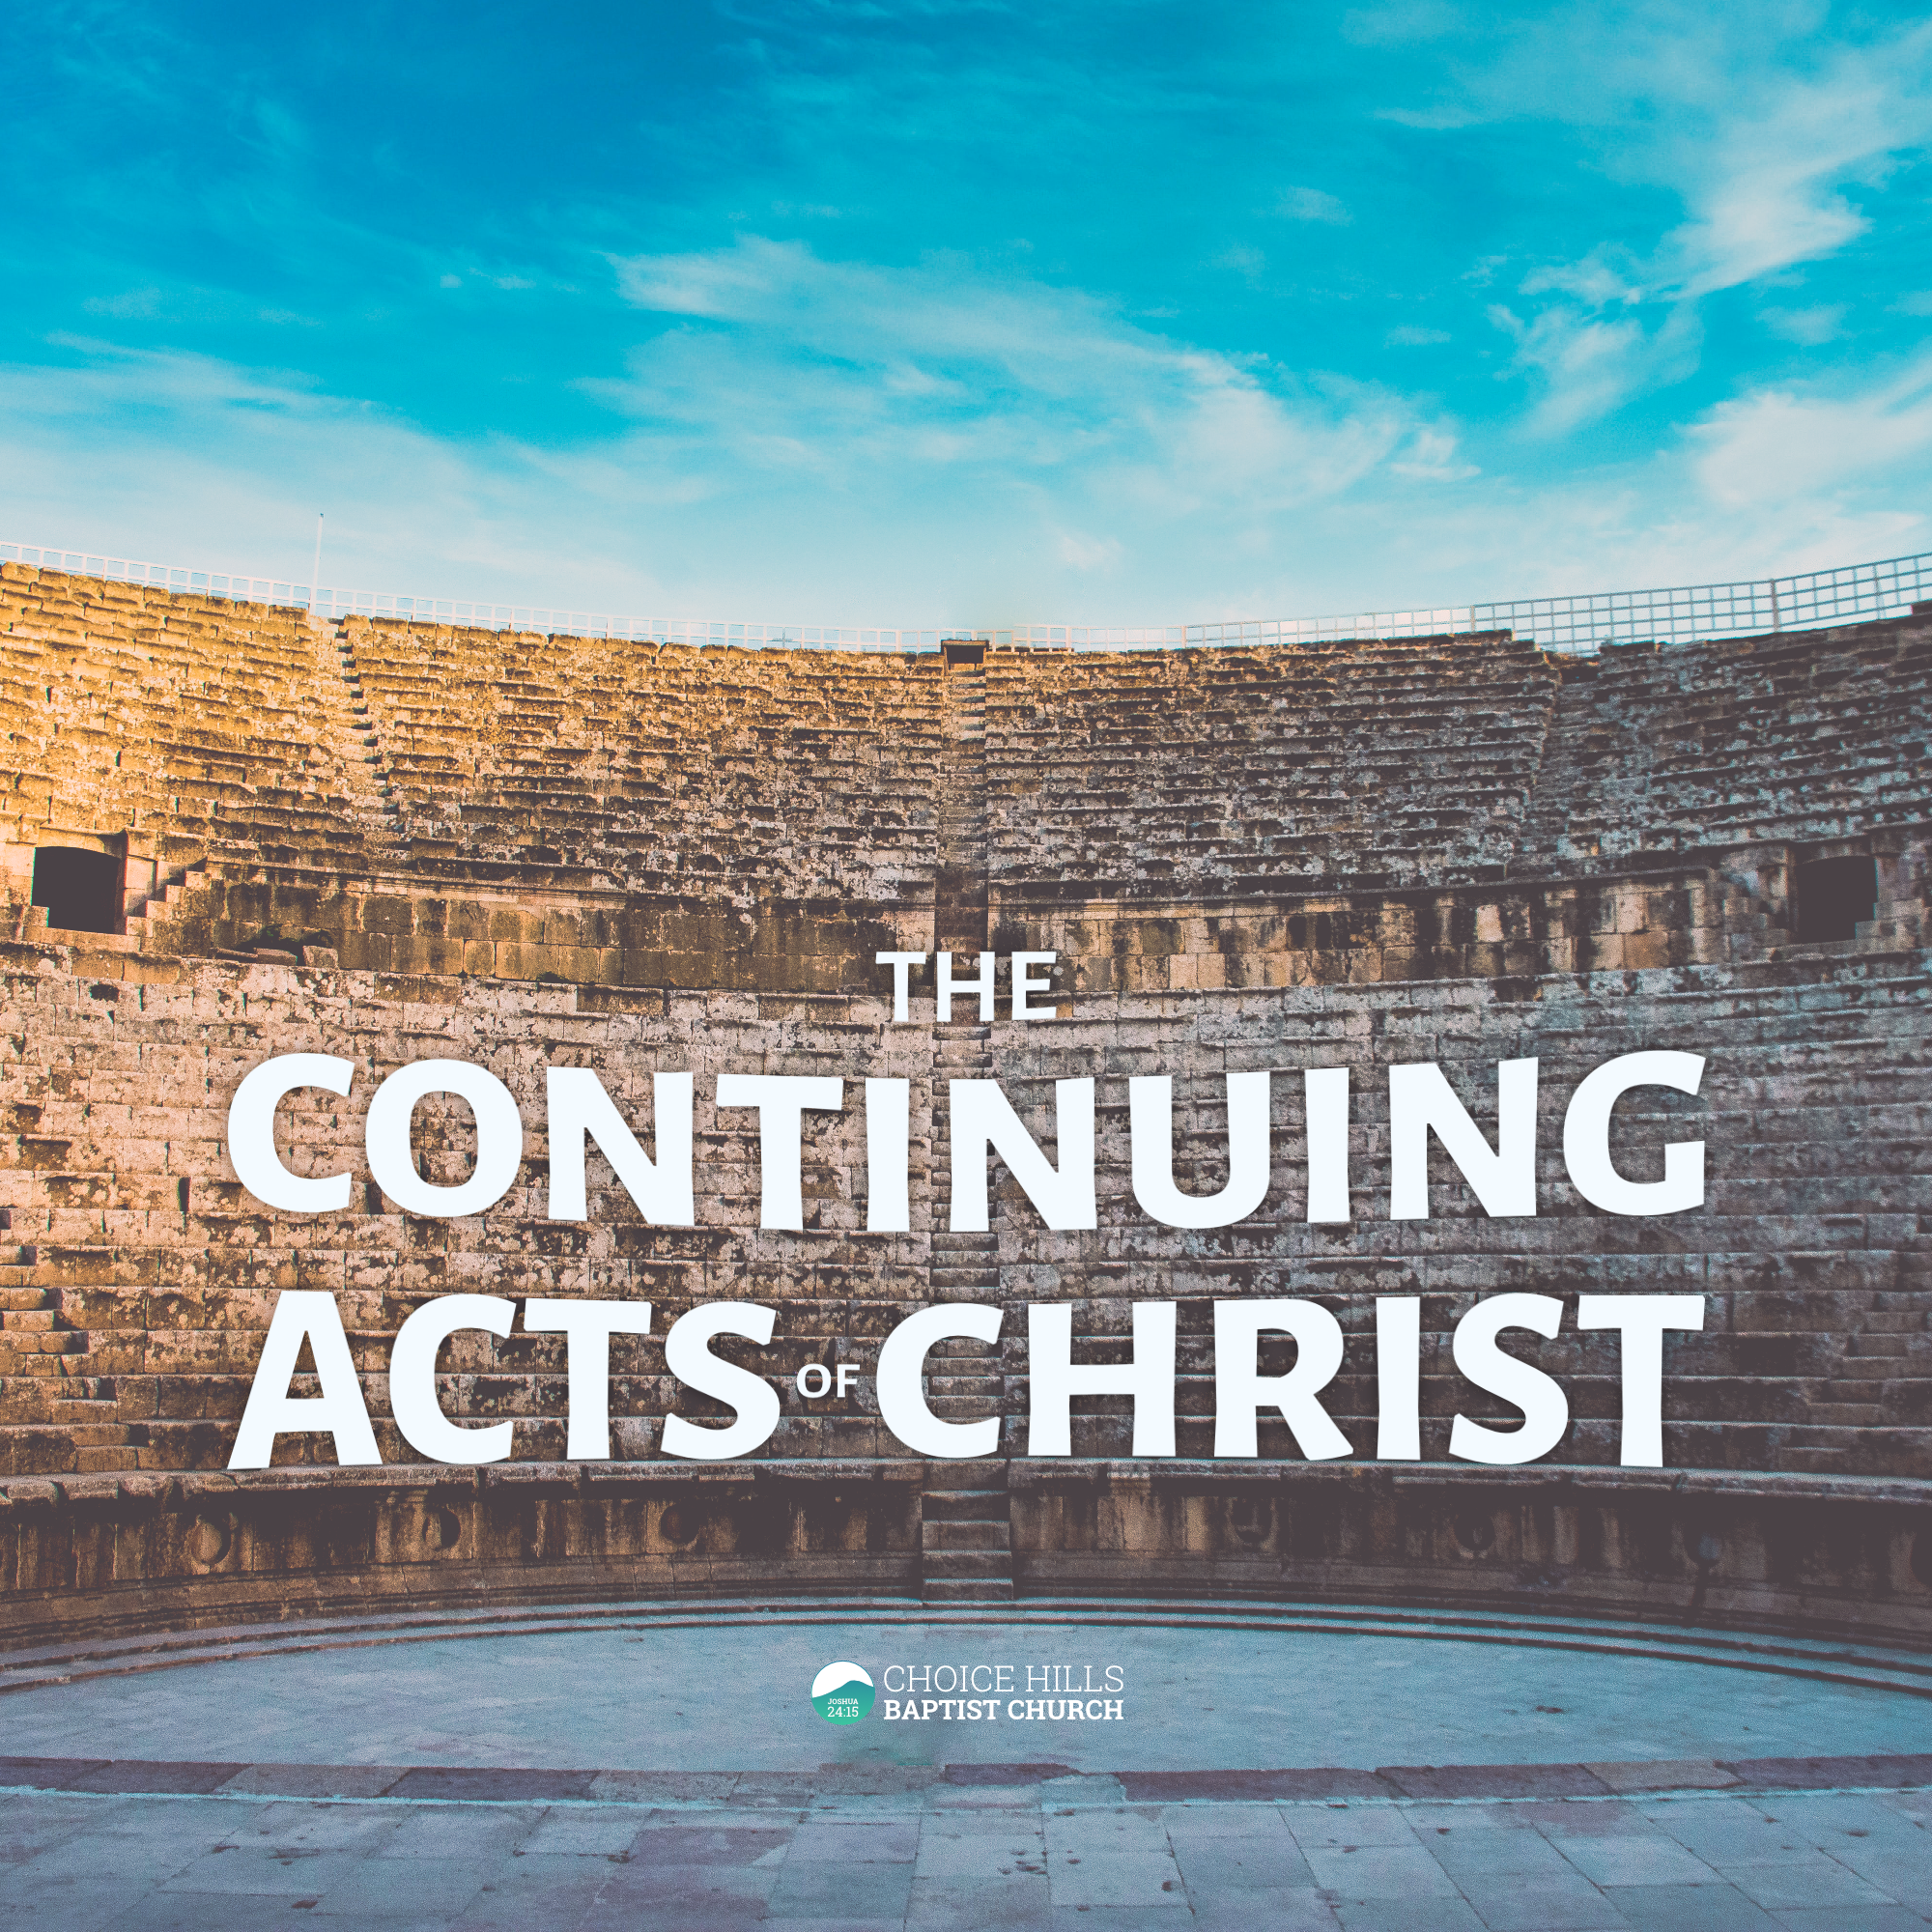 Persecution Foretold and Fulfilled: The Continuing Acts of Christ—A Study of the Book of Acts